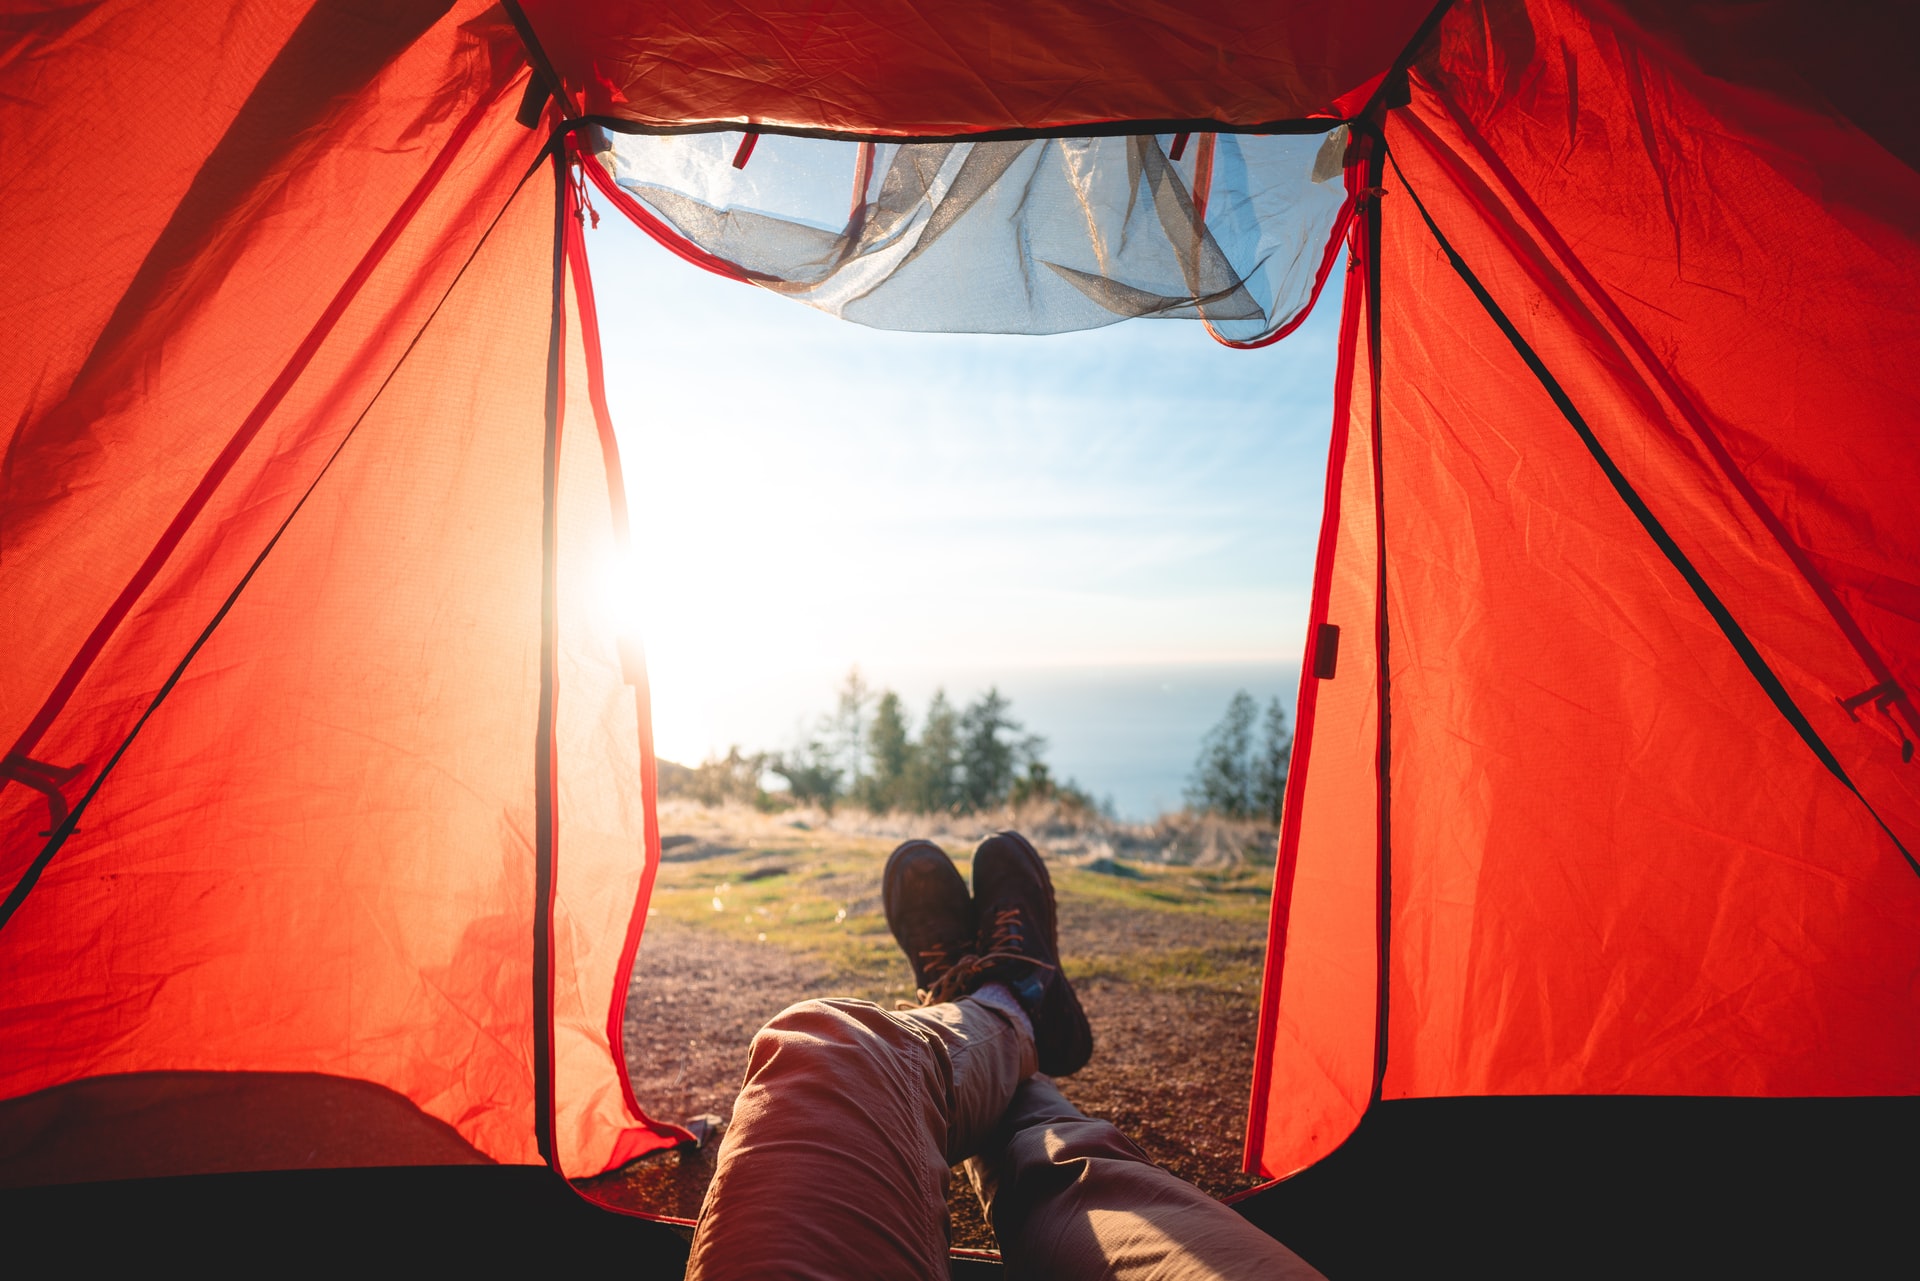 A person relaxing in a tent with their feet up, enjoying the peacefulness of the outdoors.